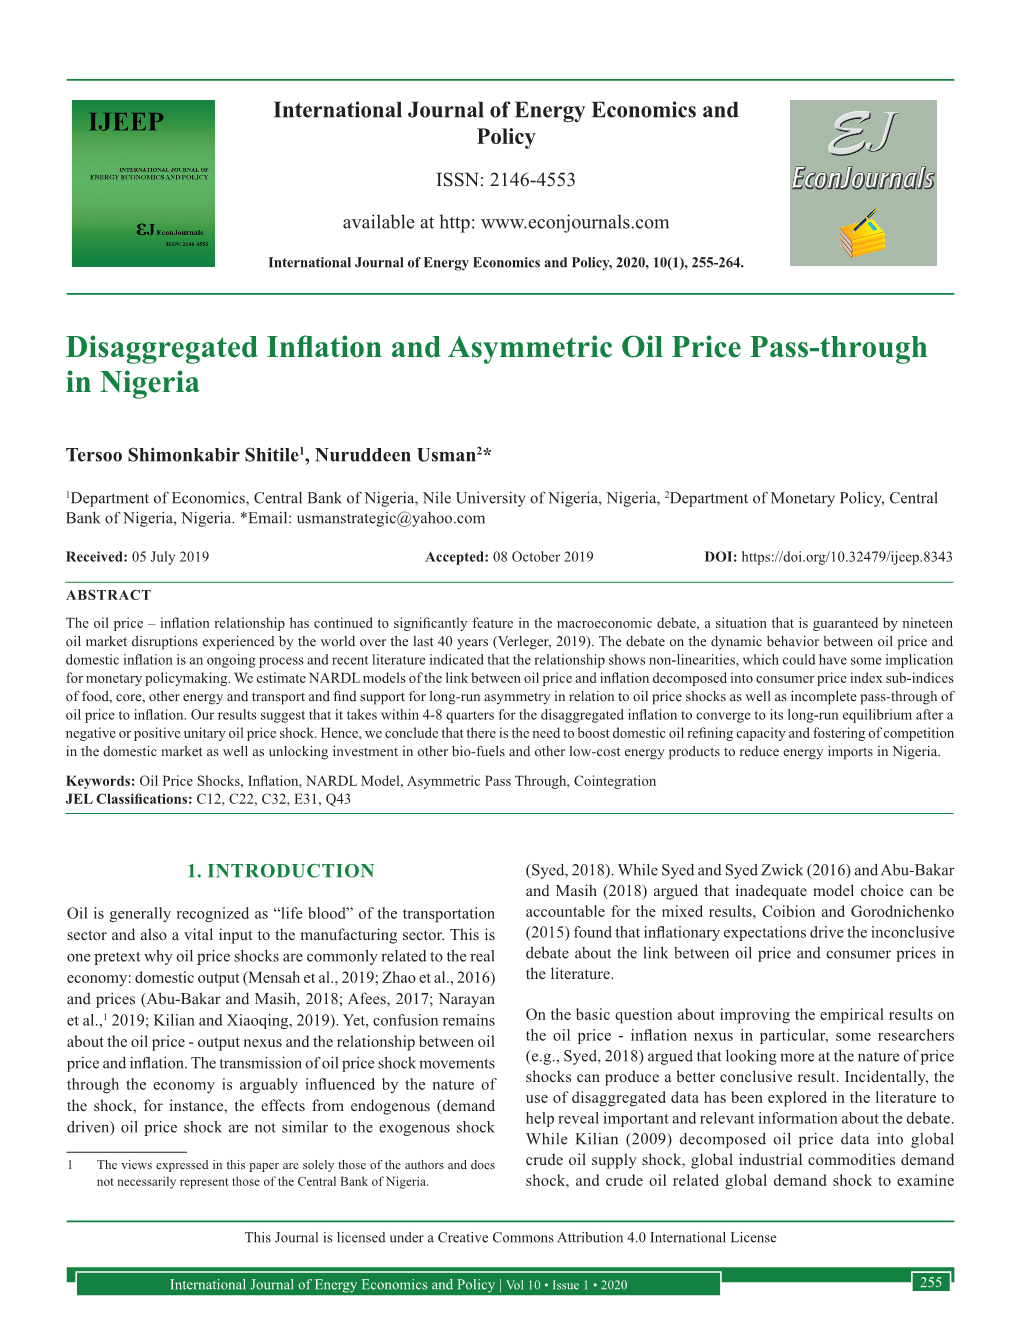 Disaggregated Inflation and Asymmetric Oil Price Pass-Through in Nigeria